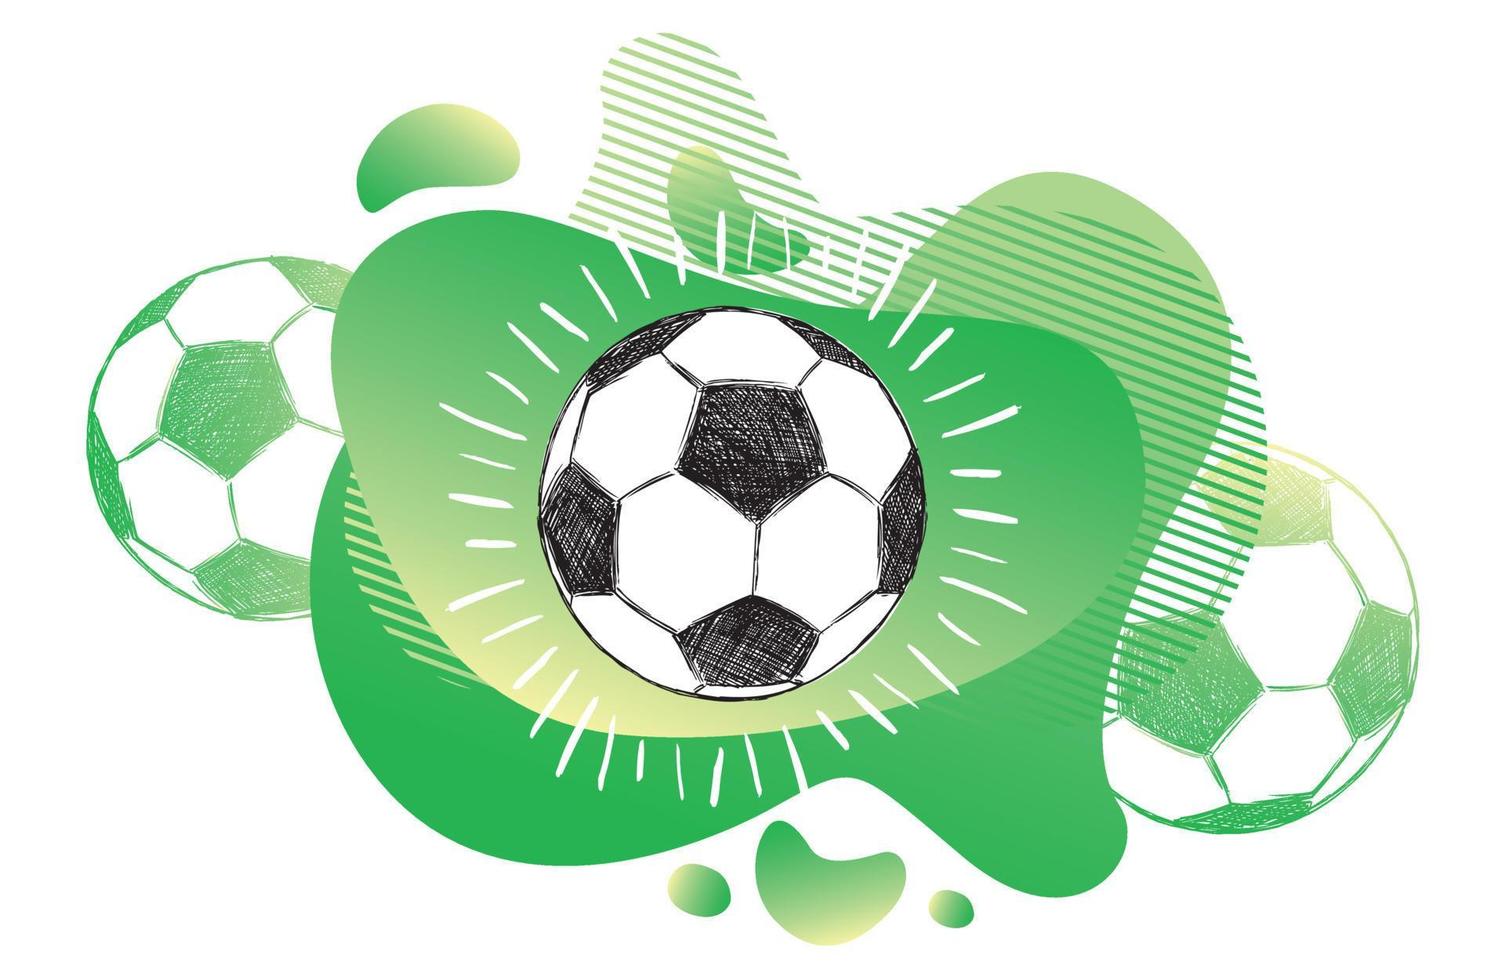 Hand drawn football, soccer ball sketch. Fluid abstract background. Banners with flowing liquid shapes. Vector